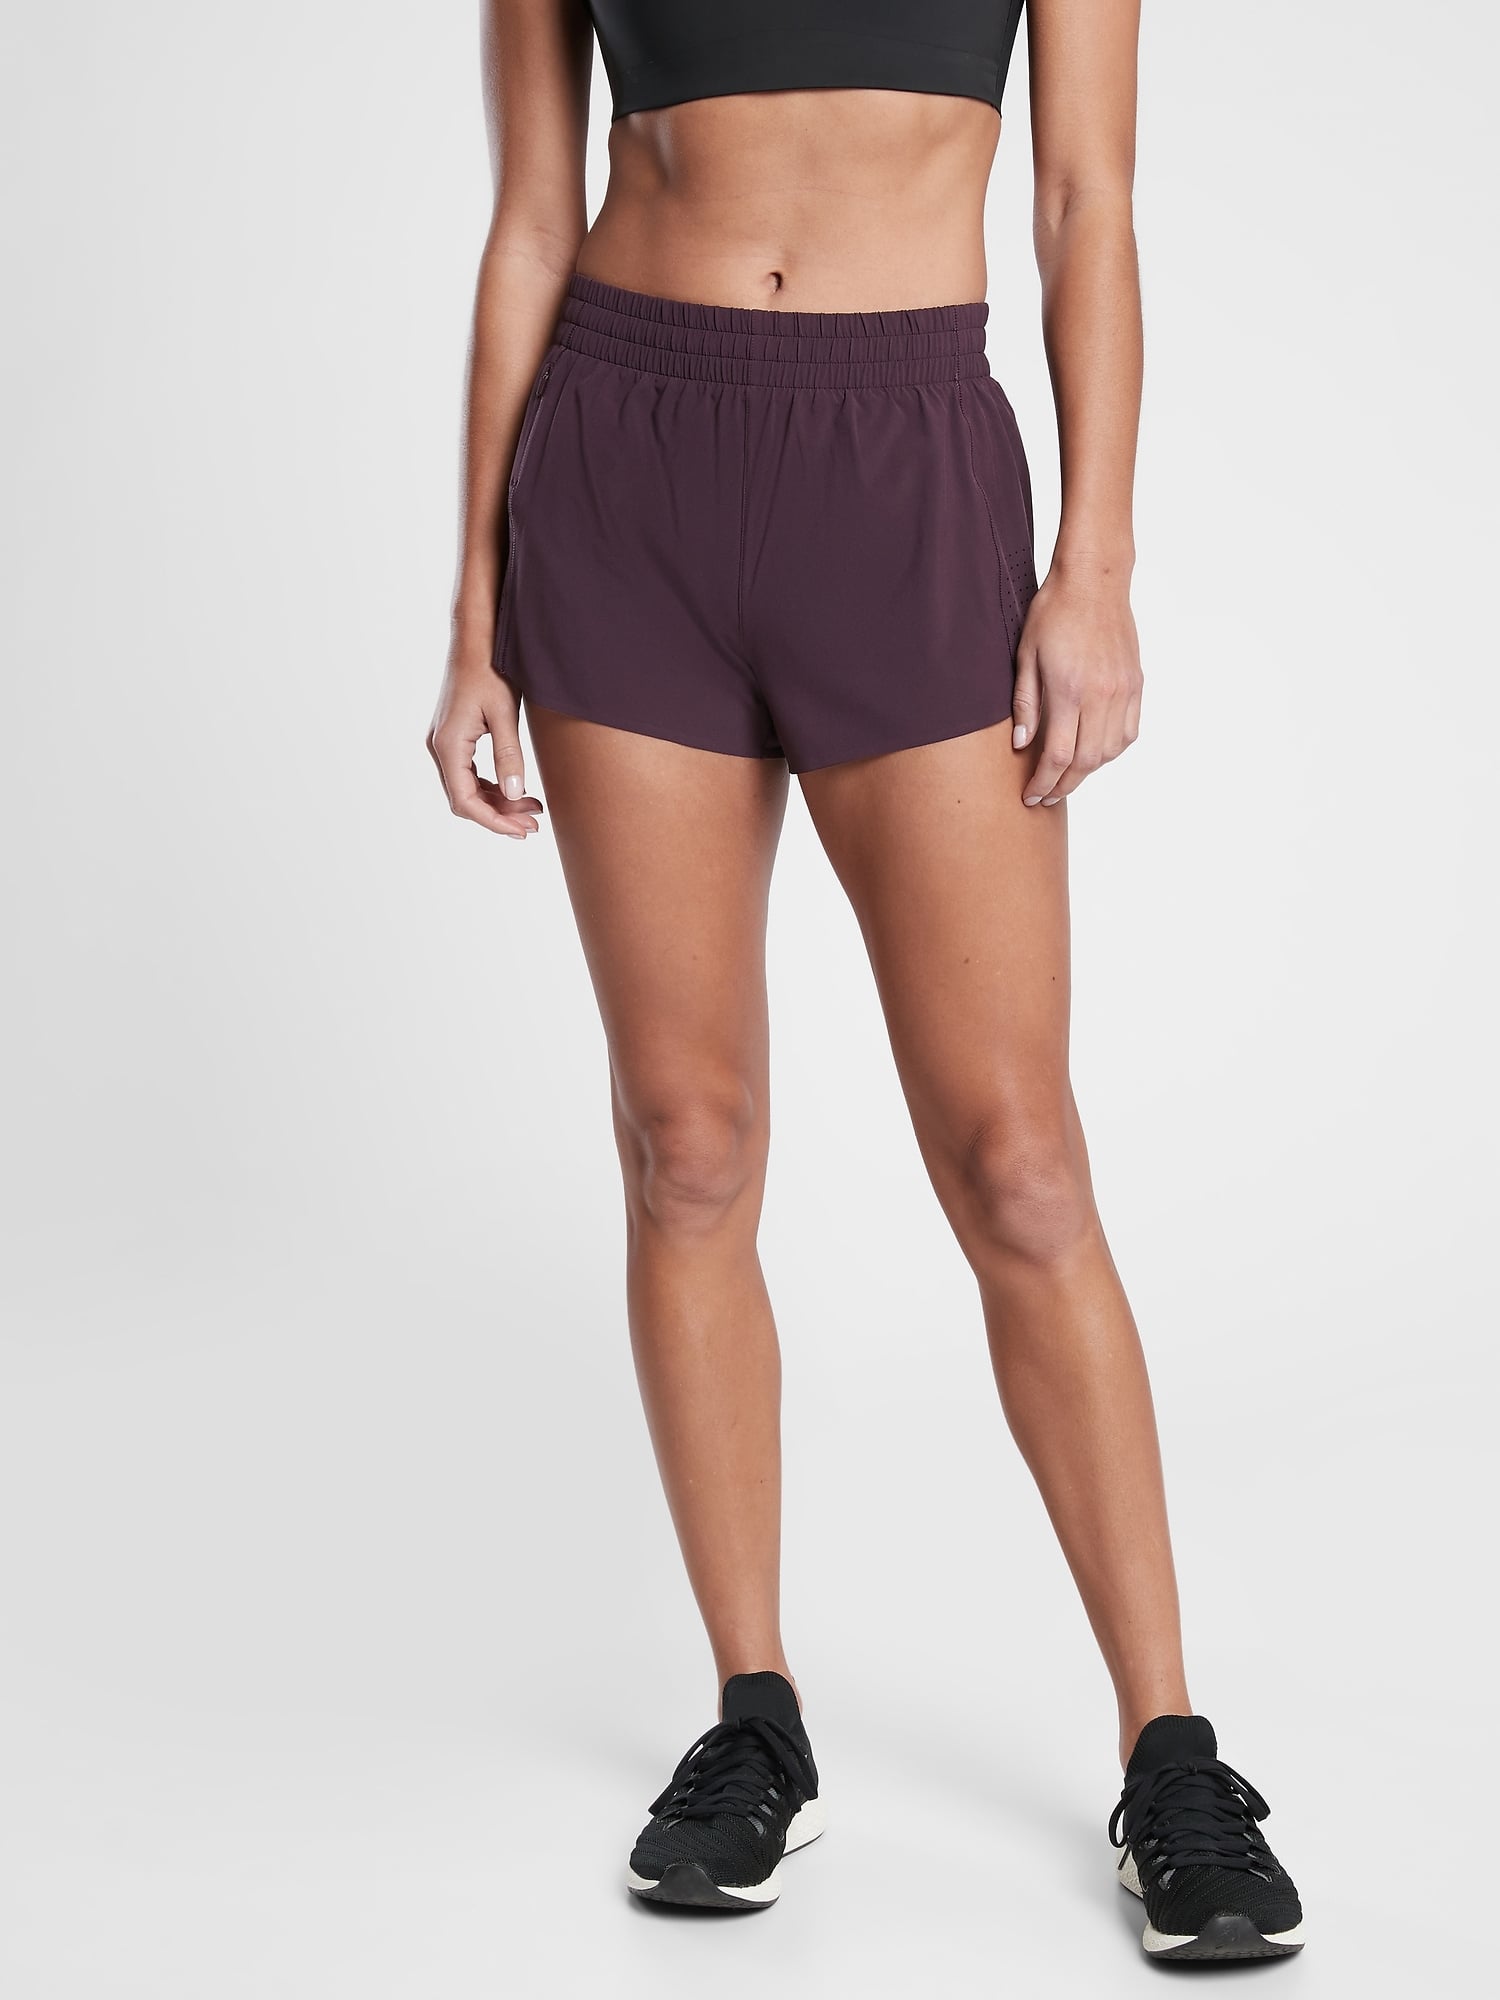 Athleta Hustle Short, In Honour of Spring, We're Shopping These 11 Cute  Workout Shorts From Athleta